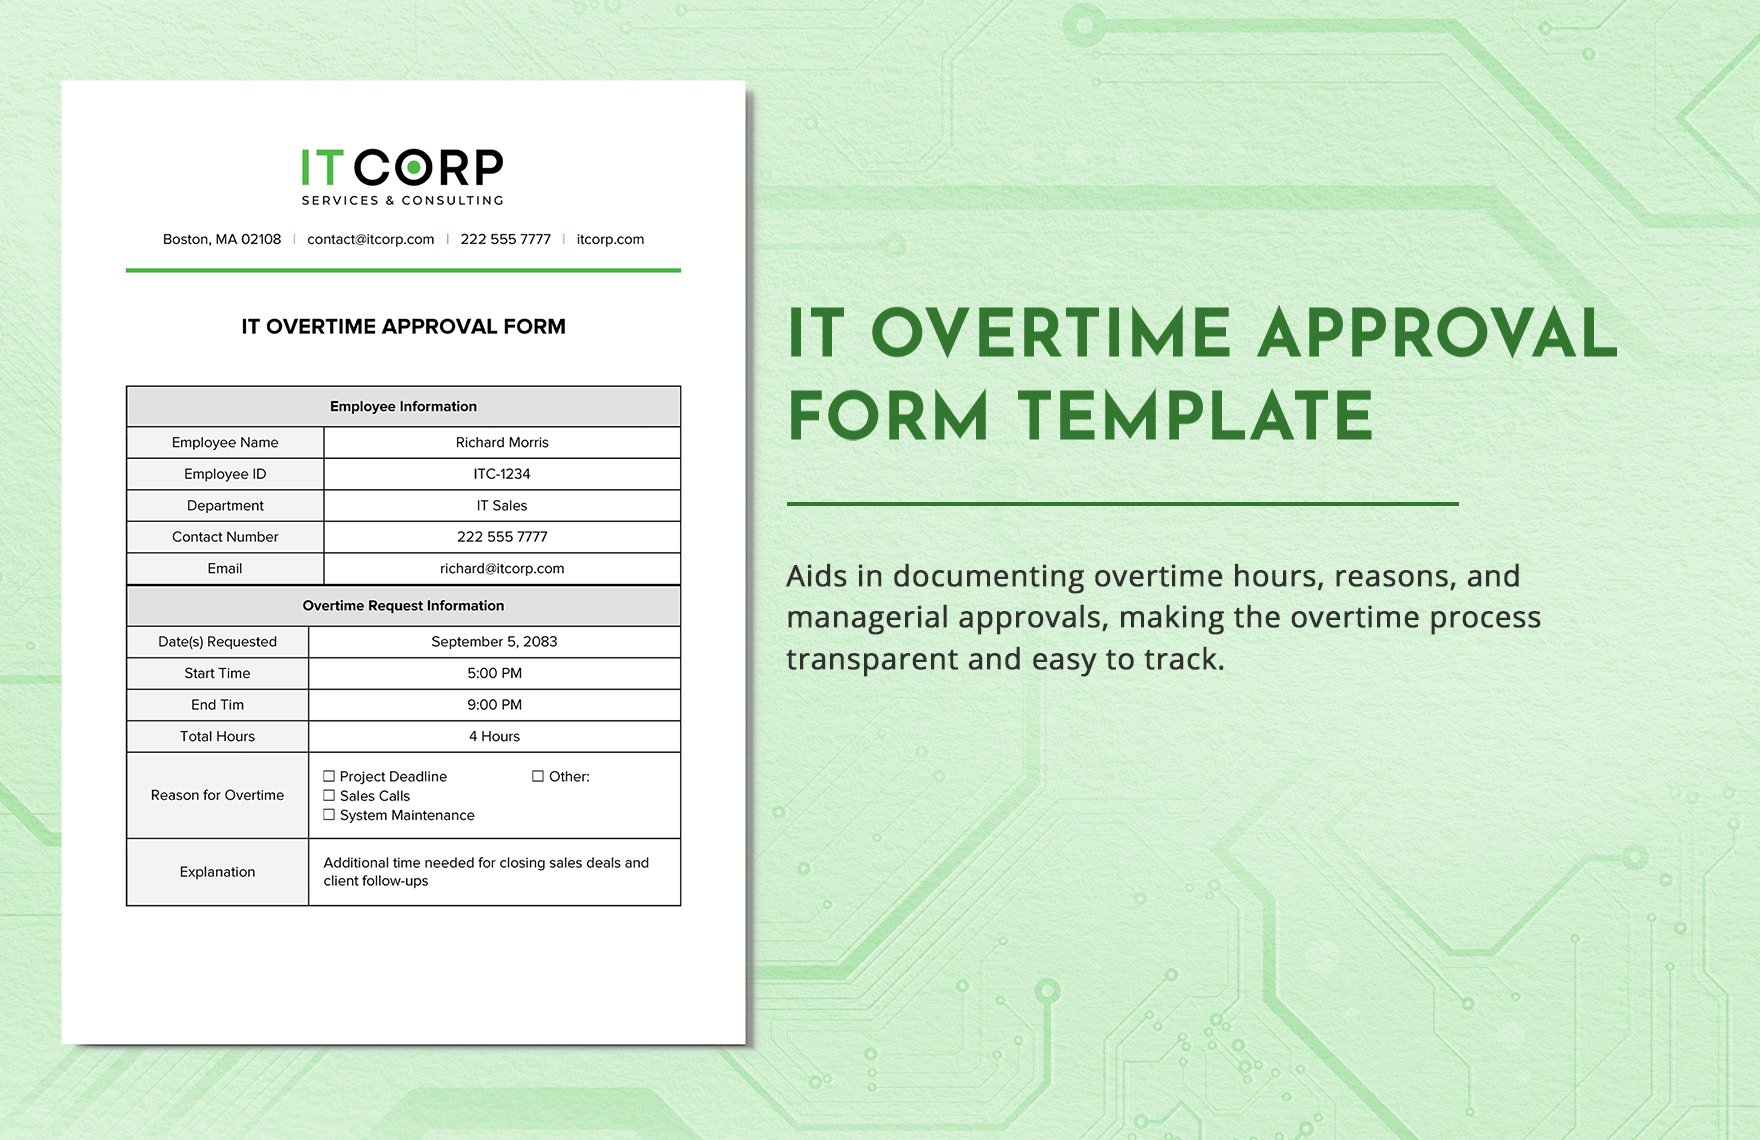 IT Overtime Approval Form Template in Word, Google Docs, PDF